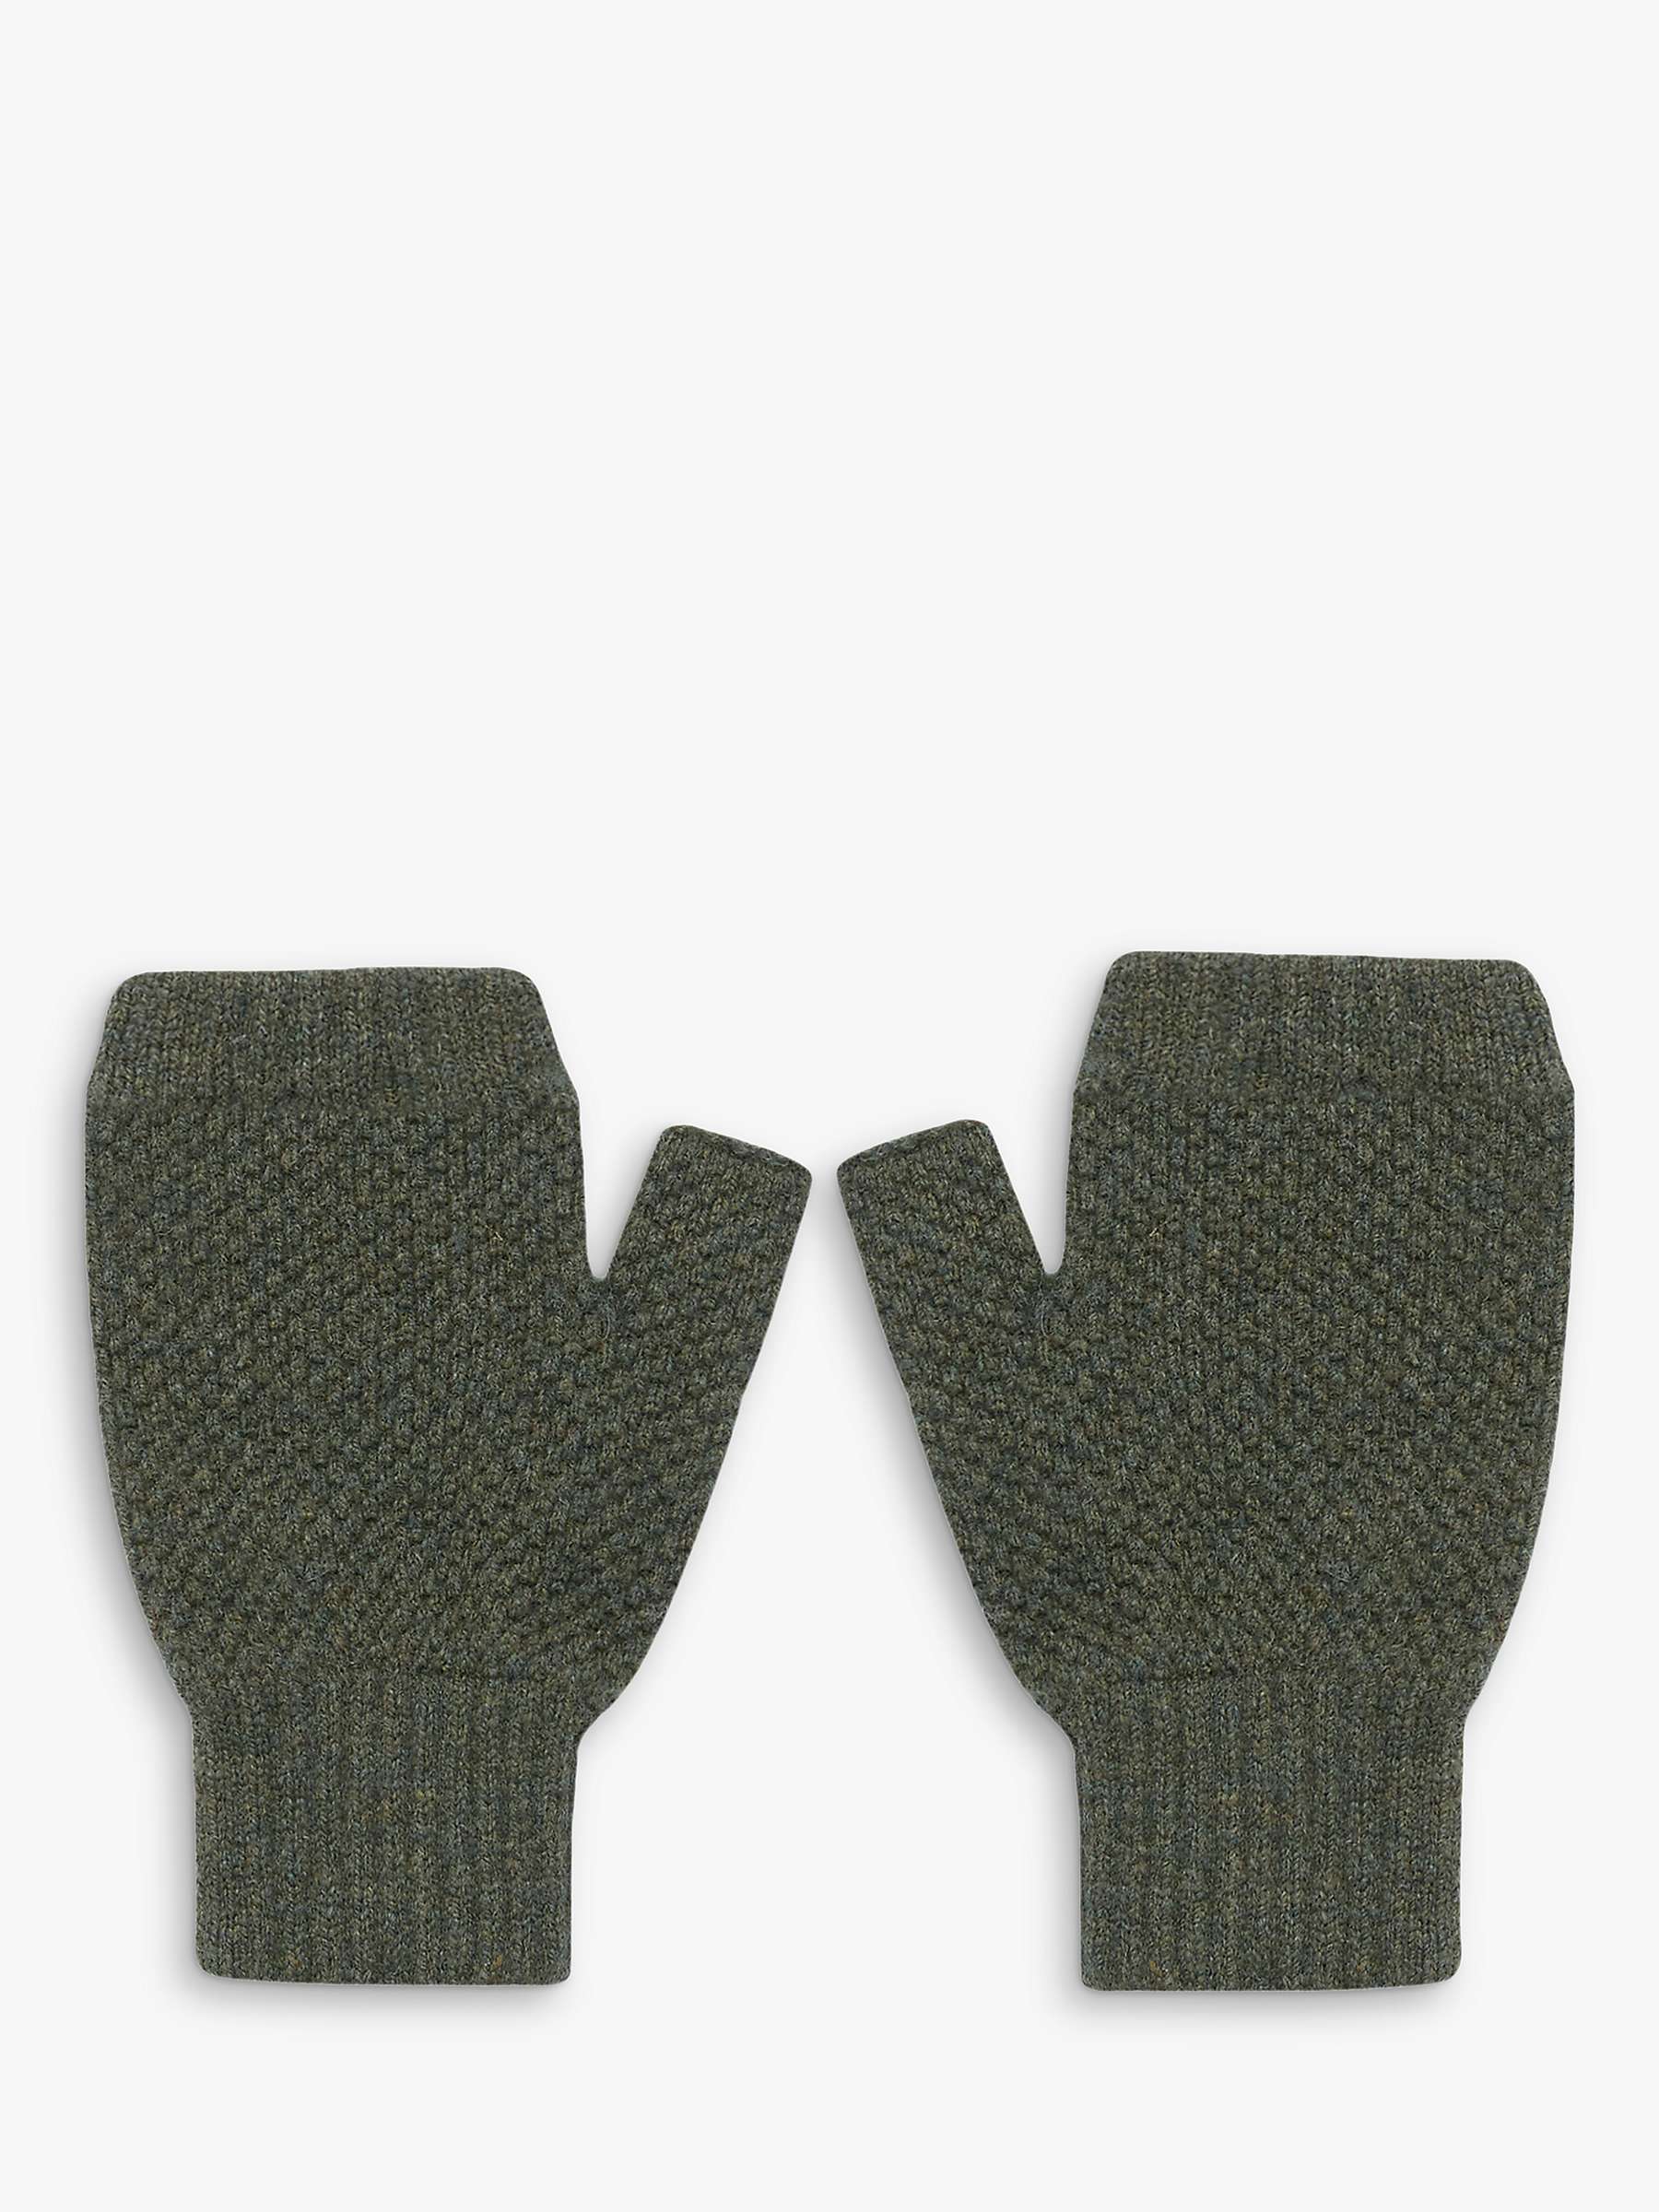 Buy Celtic & Co. Lambswool Moss Stitch Fingerless Gloves Online at johnlewis.com